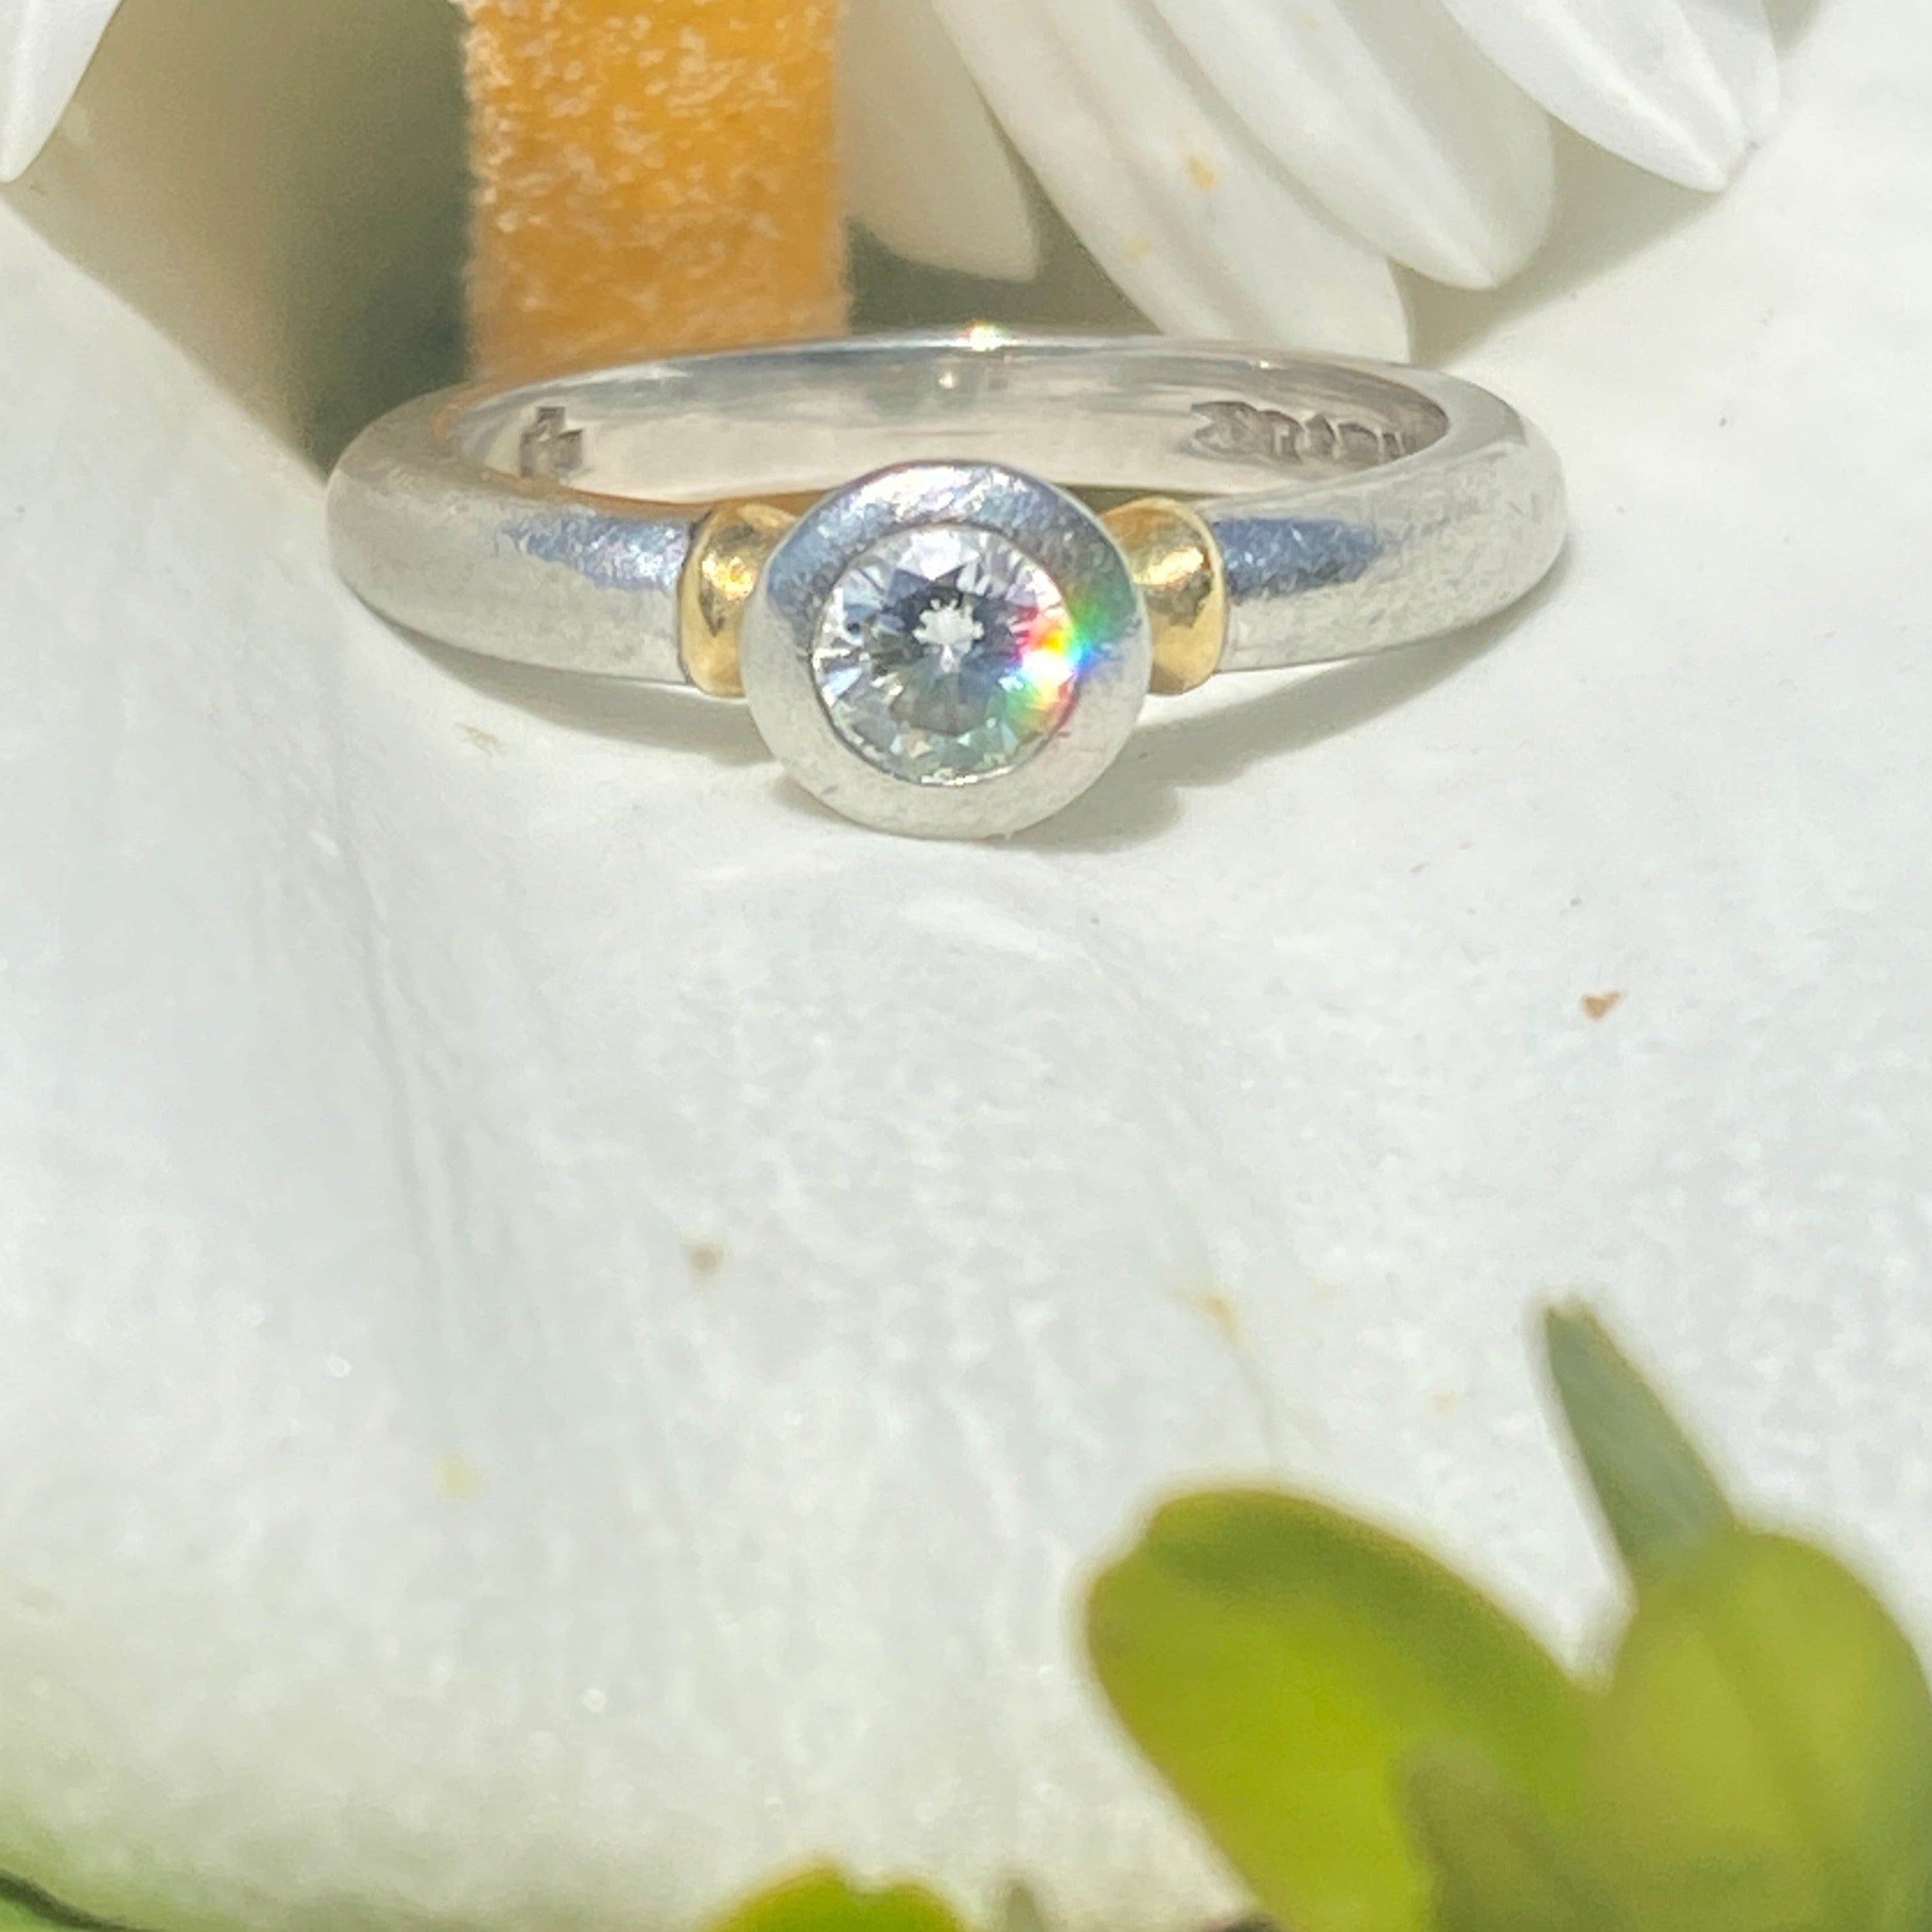 Platinum Solitaire Diamond Ring Size L or 5 3/4 Usa.